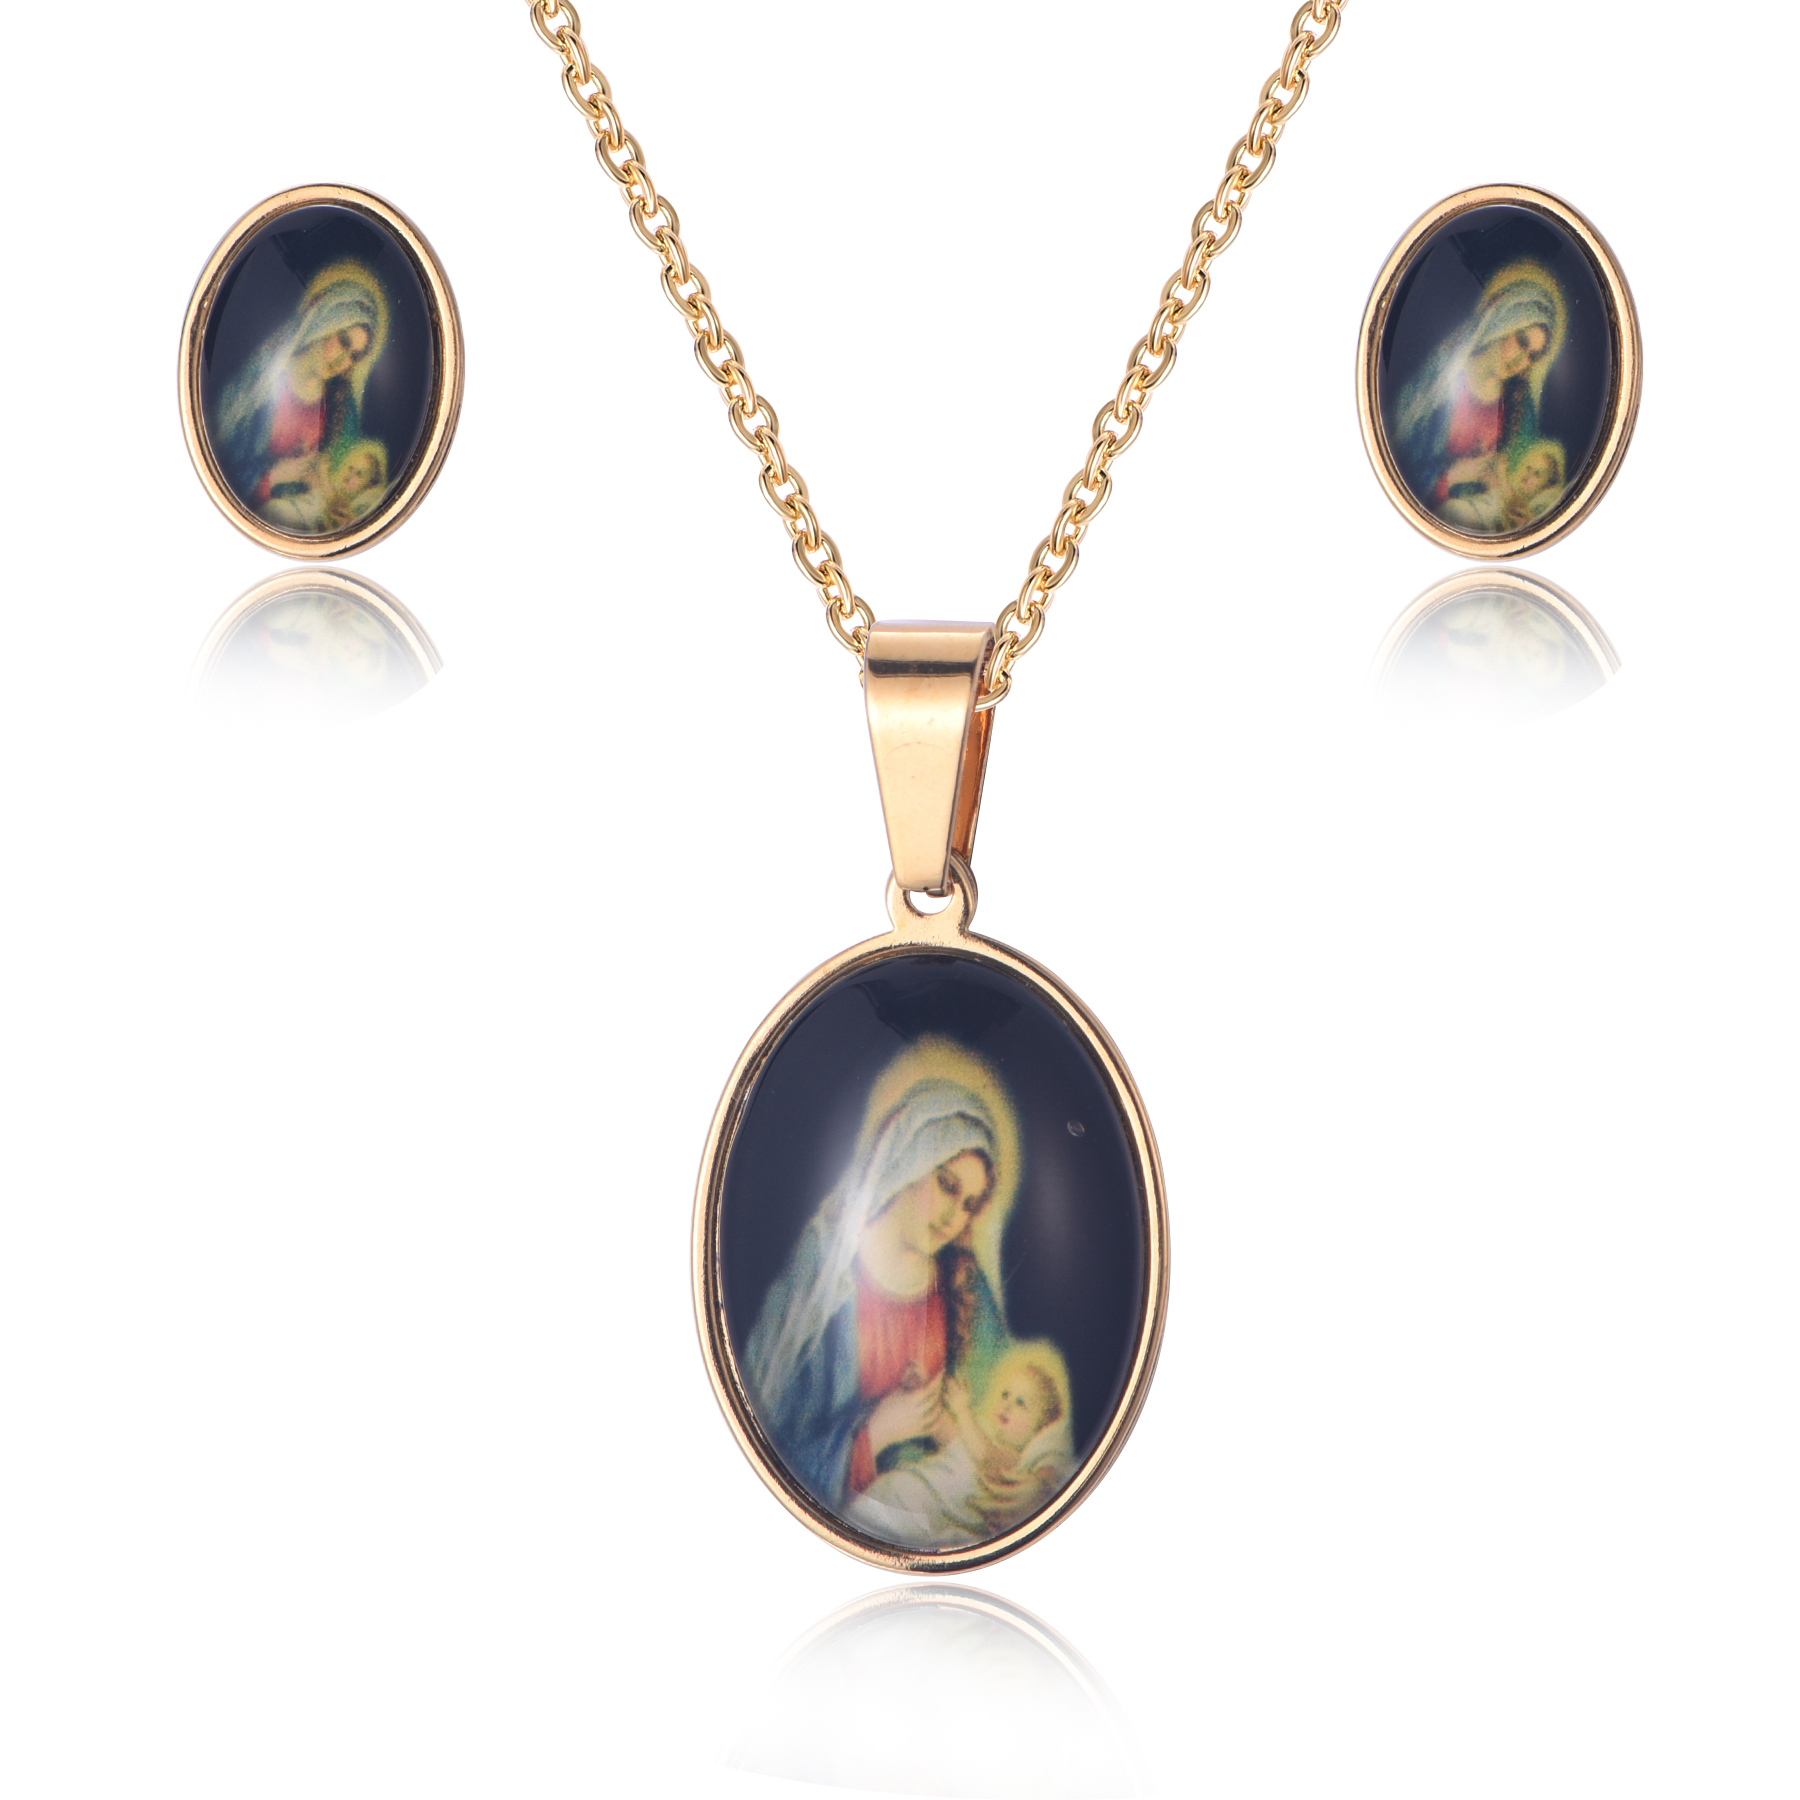 18K Gold Plated Stainless Steel Virgin Mary Epoxy Photo Religious Necklace Jewelry Set SJ-14